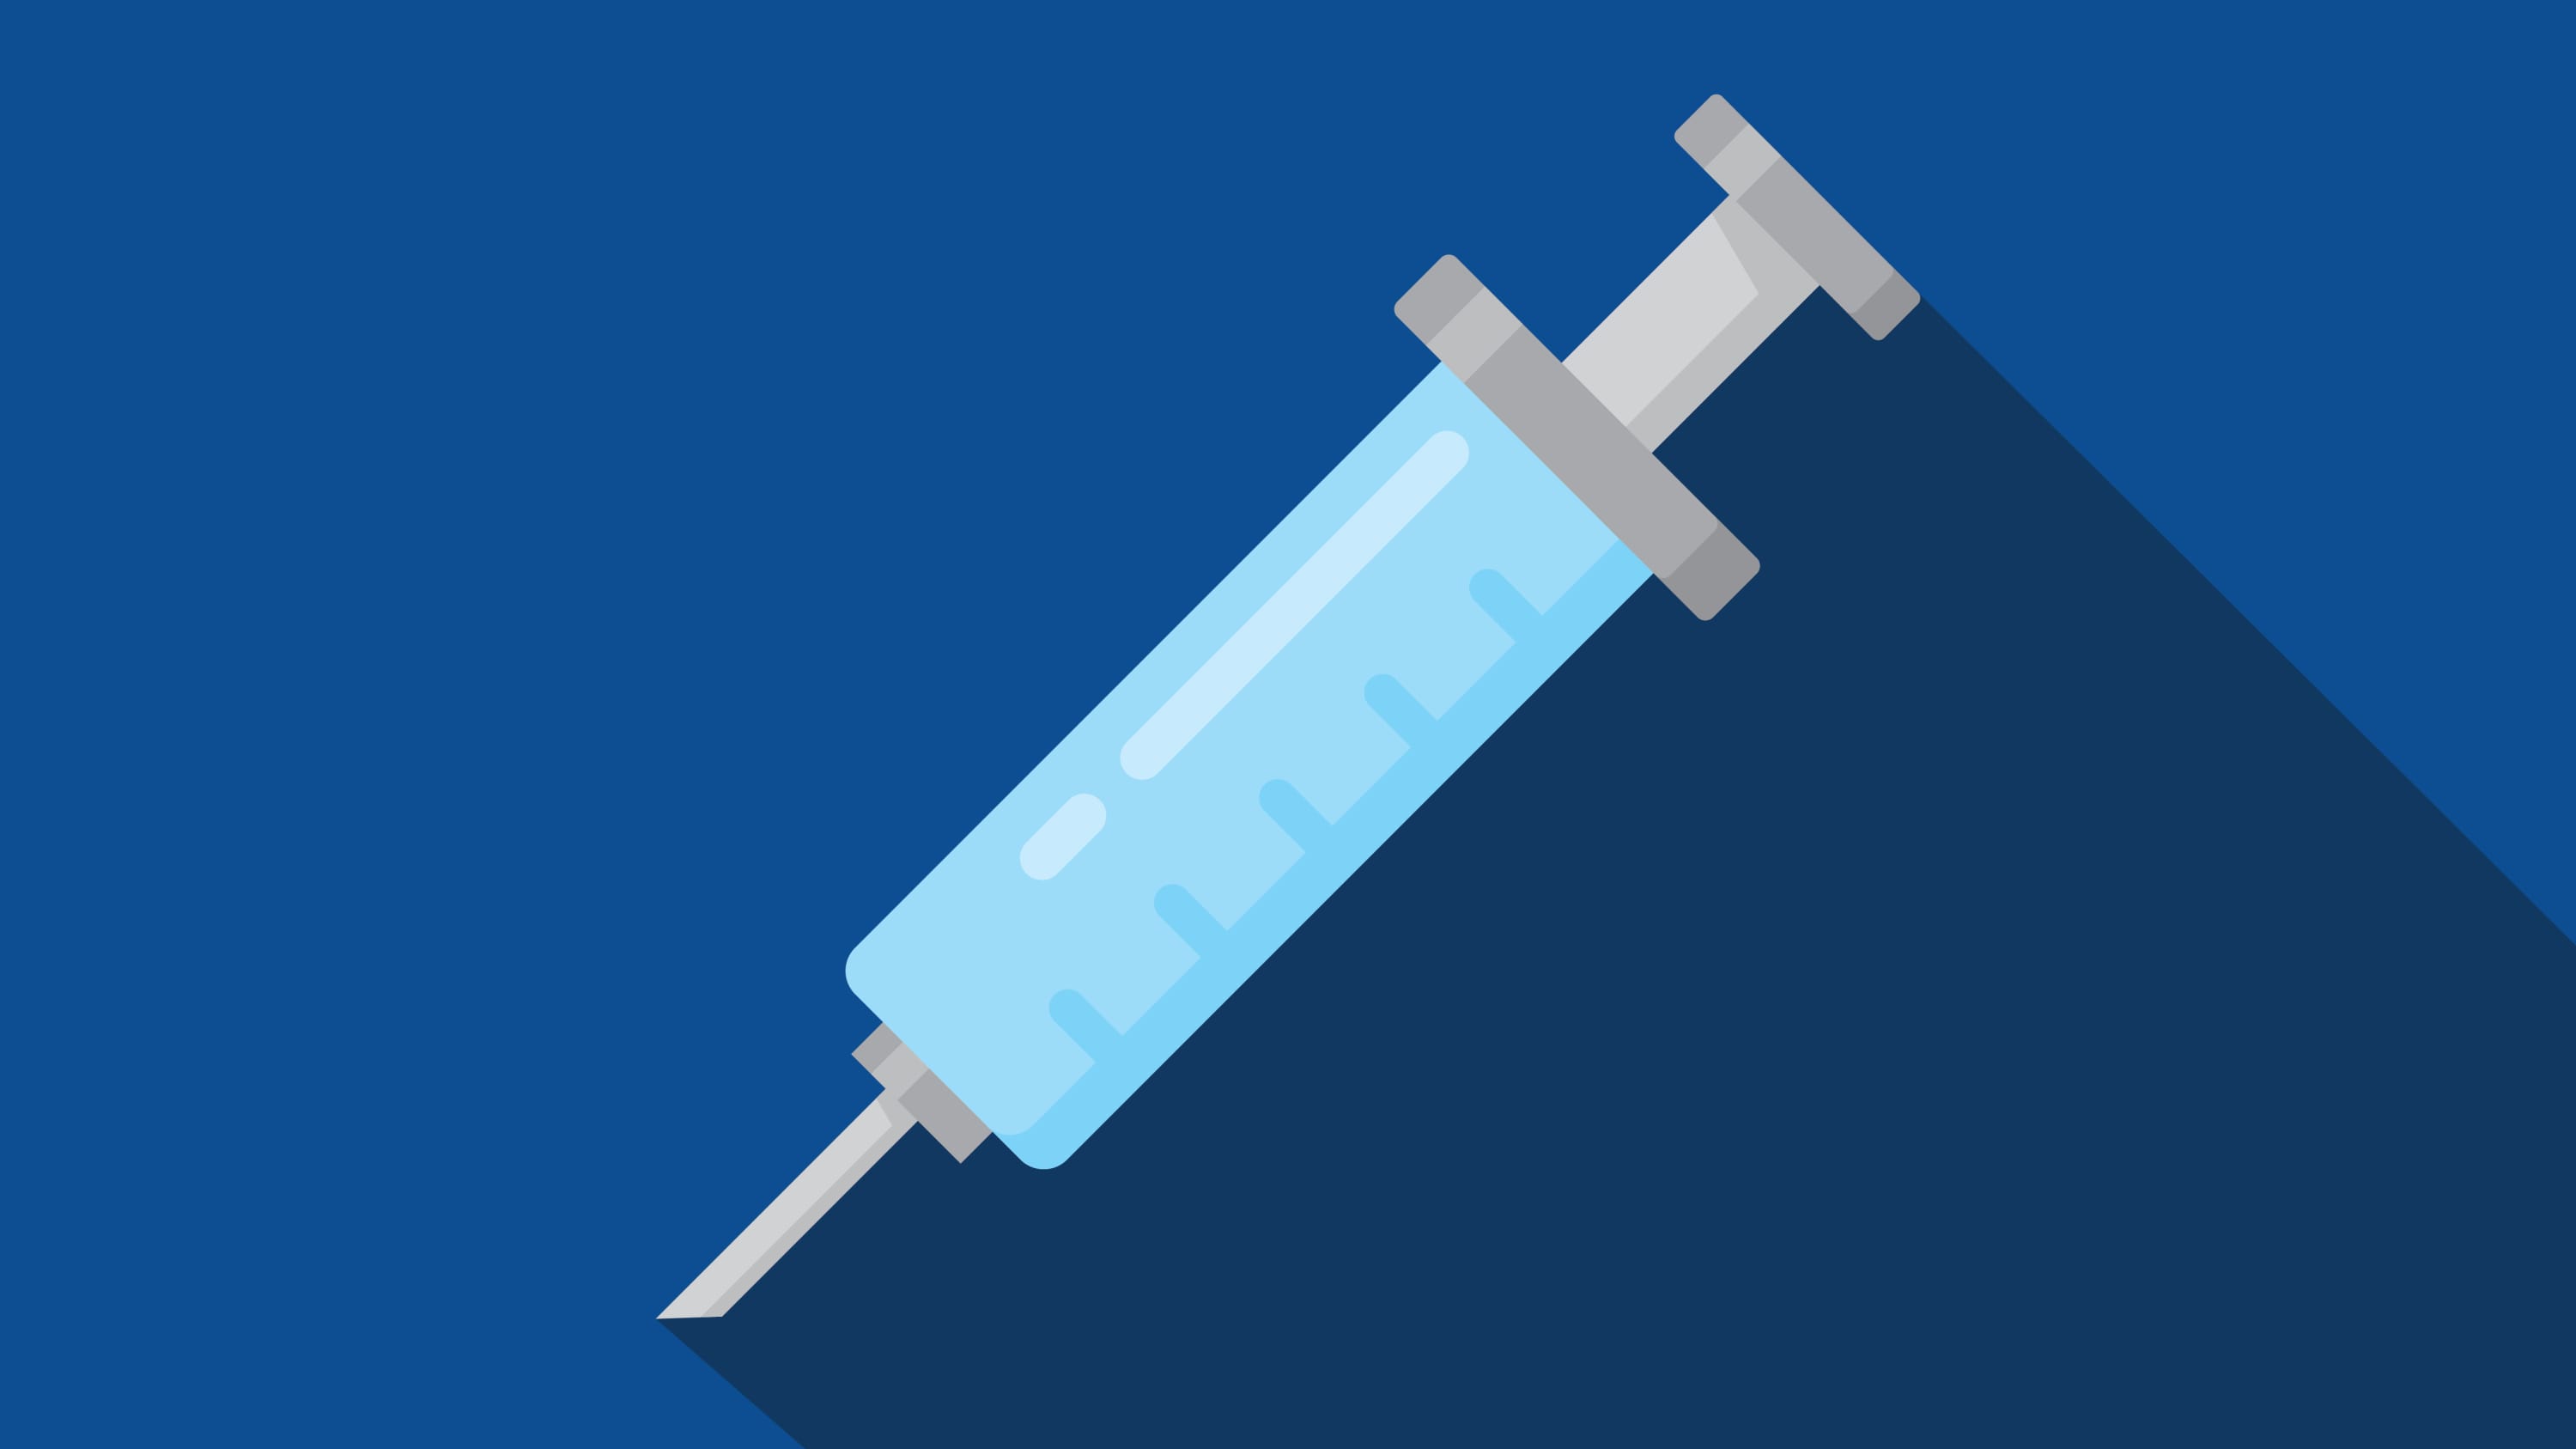 Thumbnail illustration of a needle on a blue background